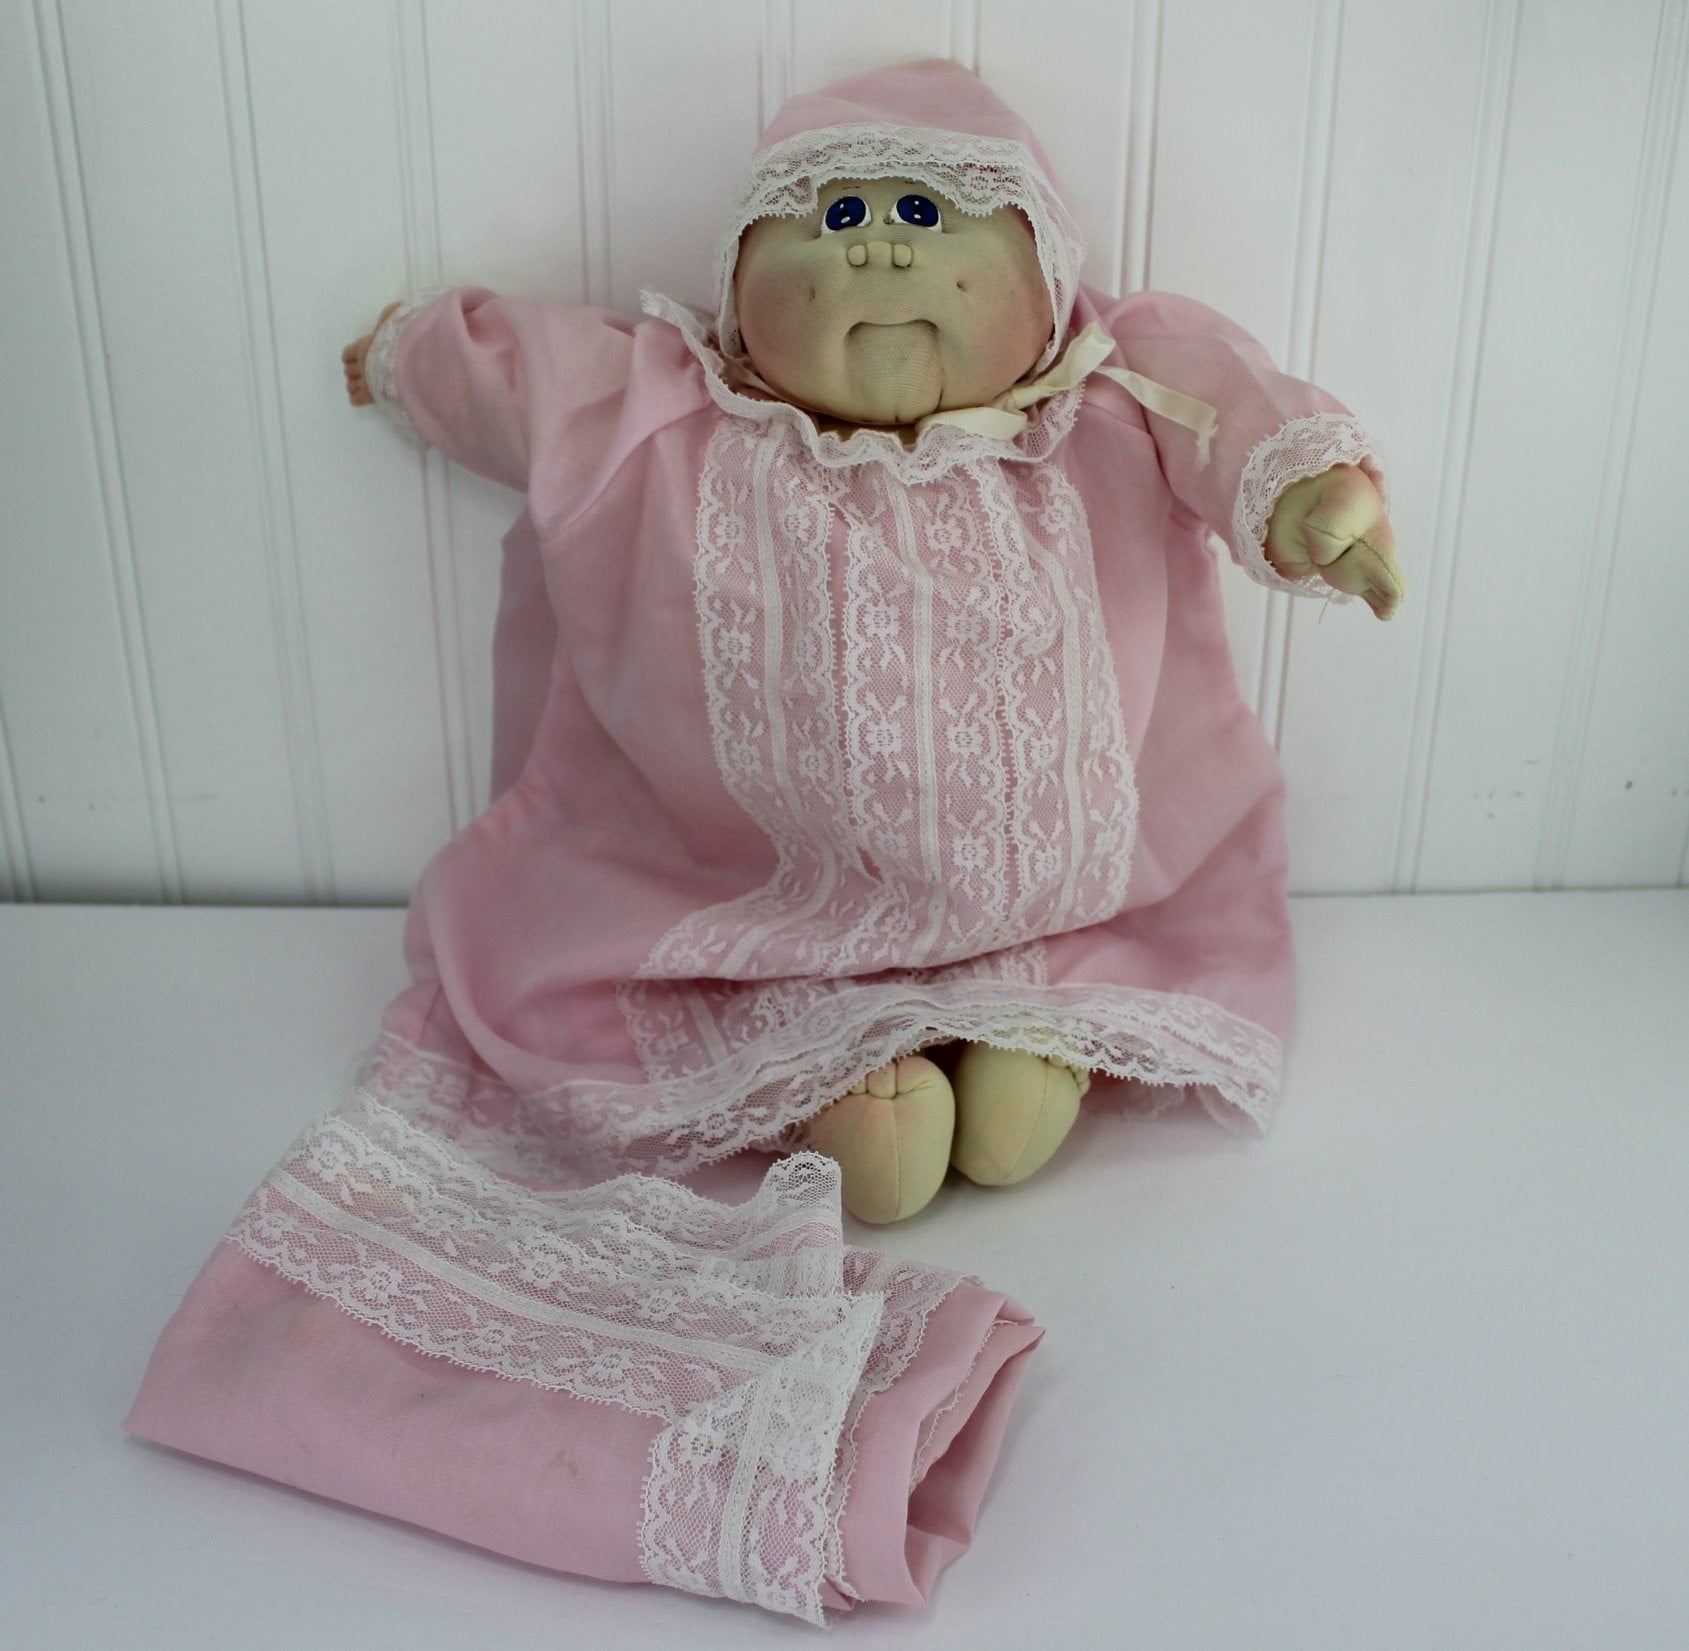 Cabbage Patch Little People Preemie II Doll Birth Dec. 27 1982 Birth Certif & Name Change Papers